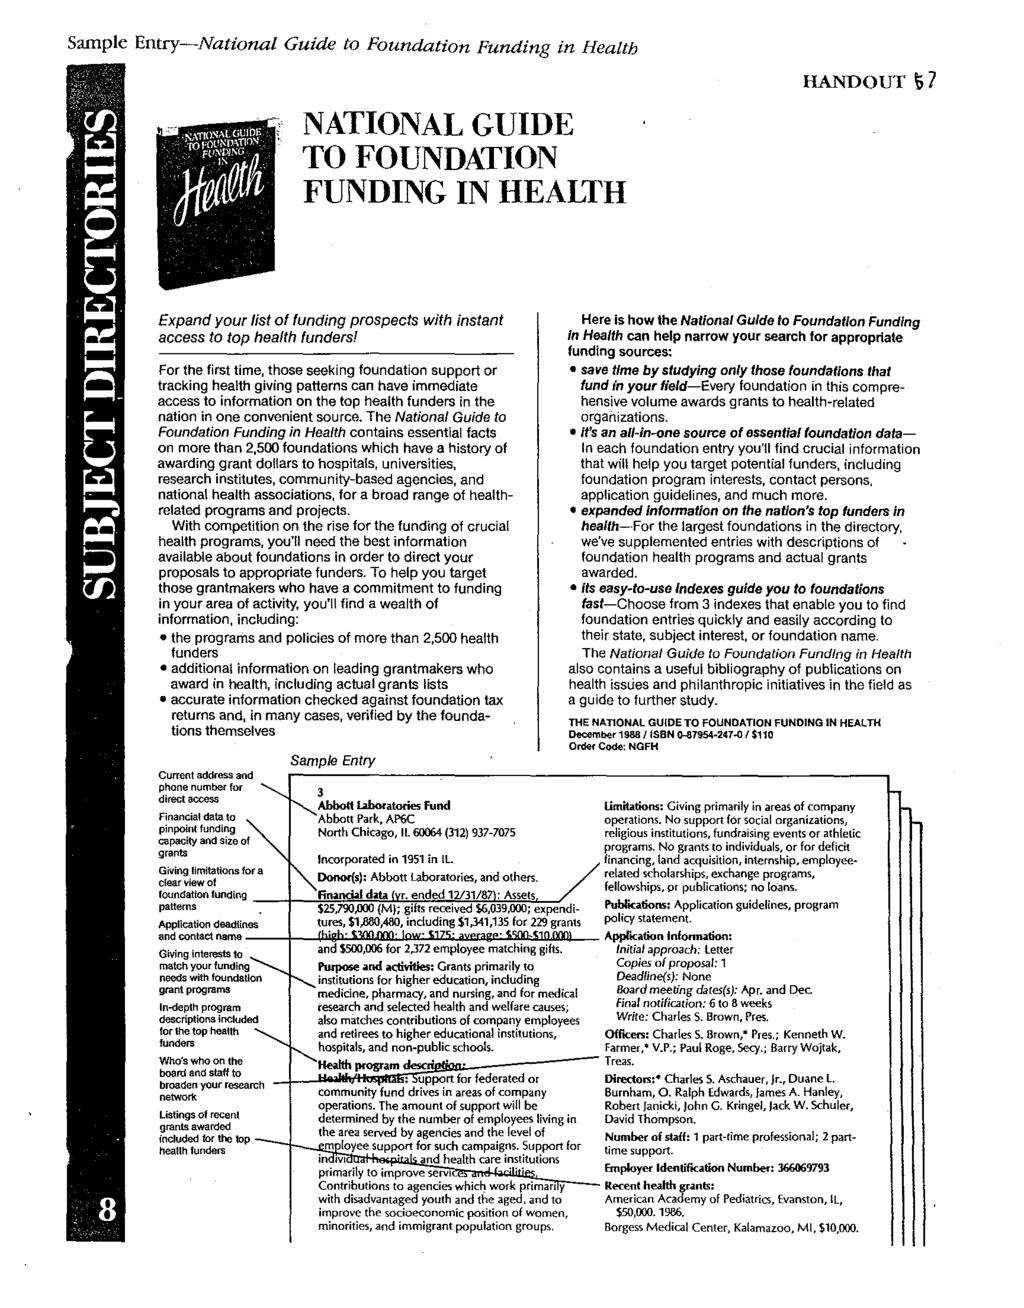 Sample Entry-National Guide to Foundation Funding in Health NATIONAL GUIDE TO FOUNDATION FUNDING IN HEALTH HANDOUT \;7 Expand your list of funding prospects with instant access to top health lunders!